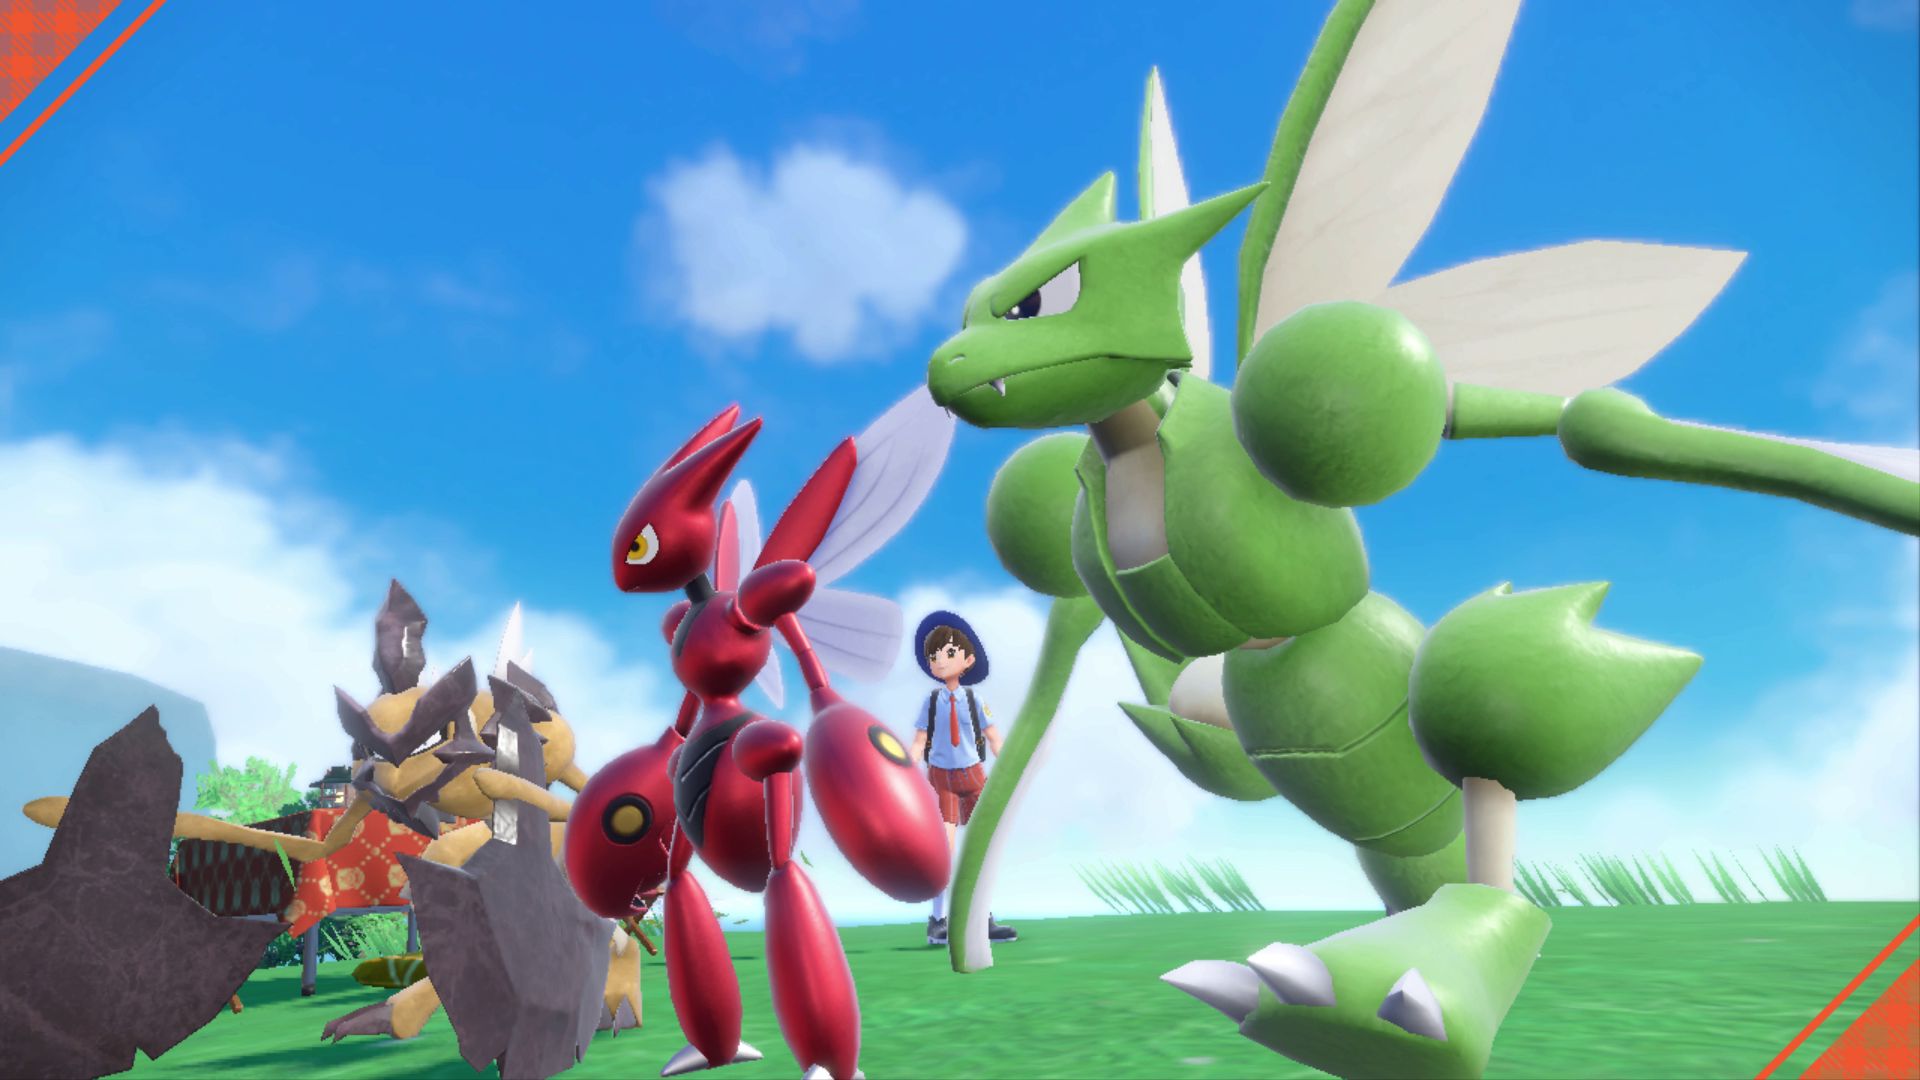 How many Pokémon are there in 'Pokémon Scarlet and Violet'?